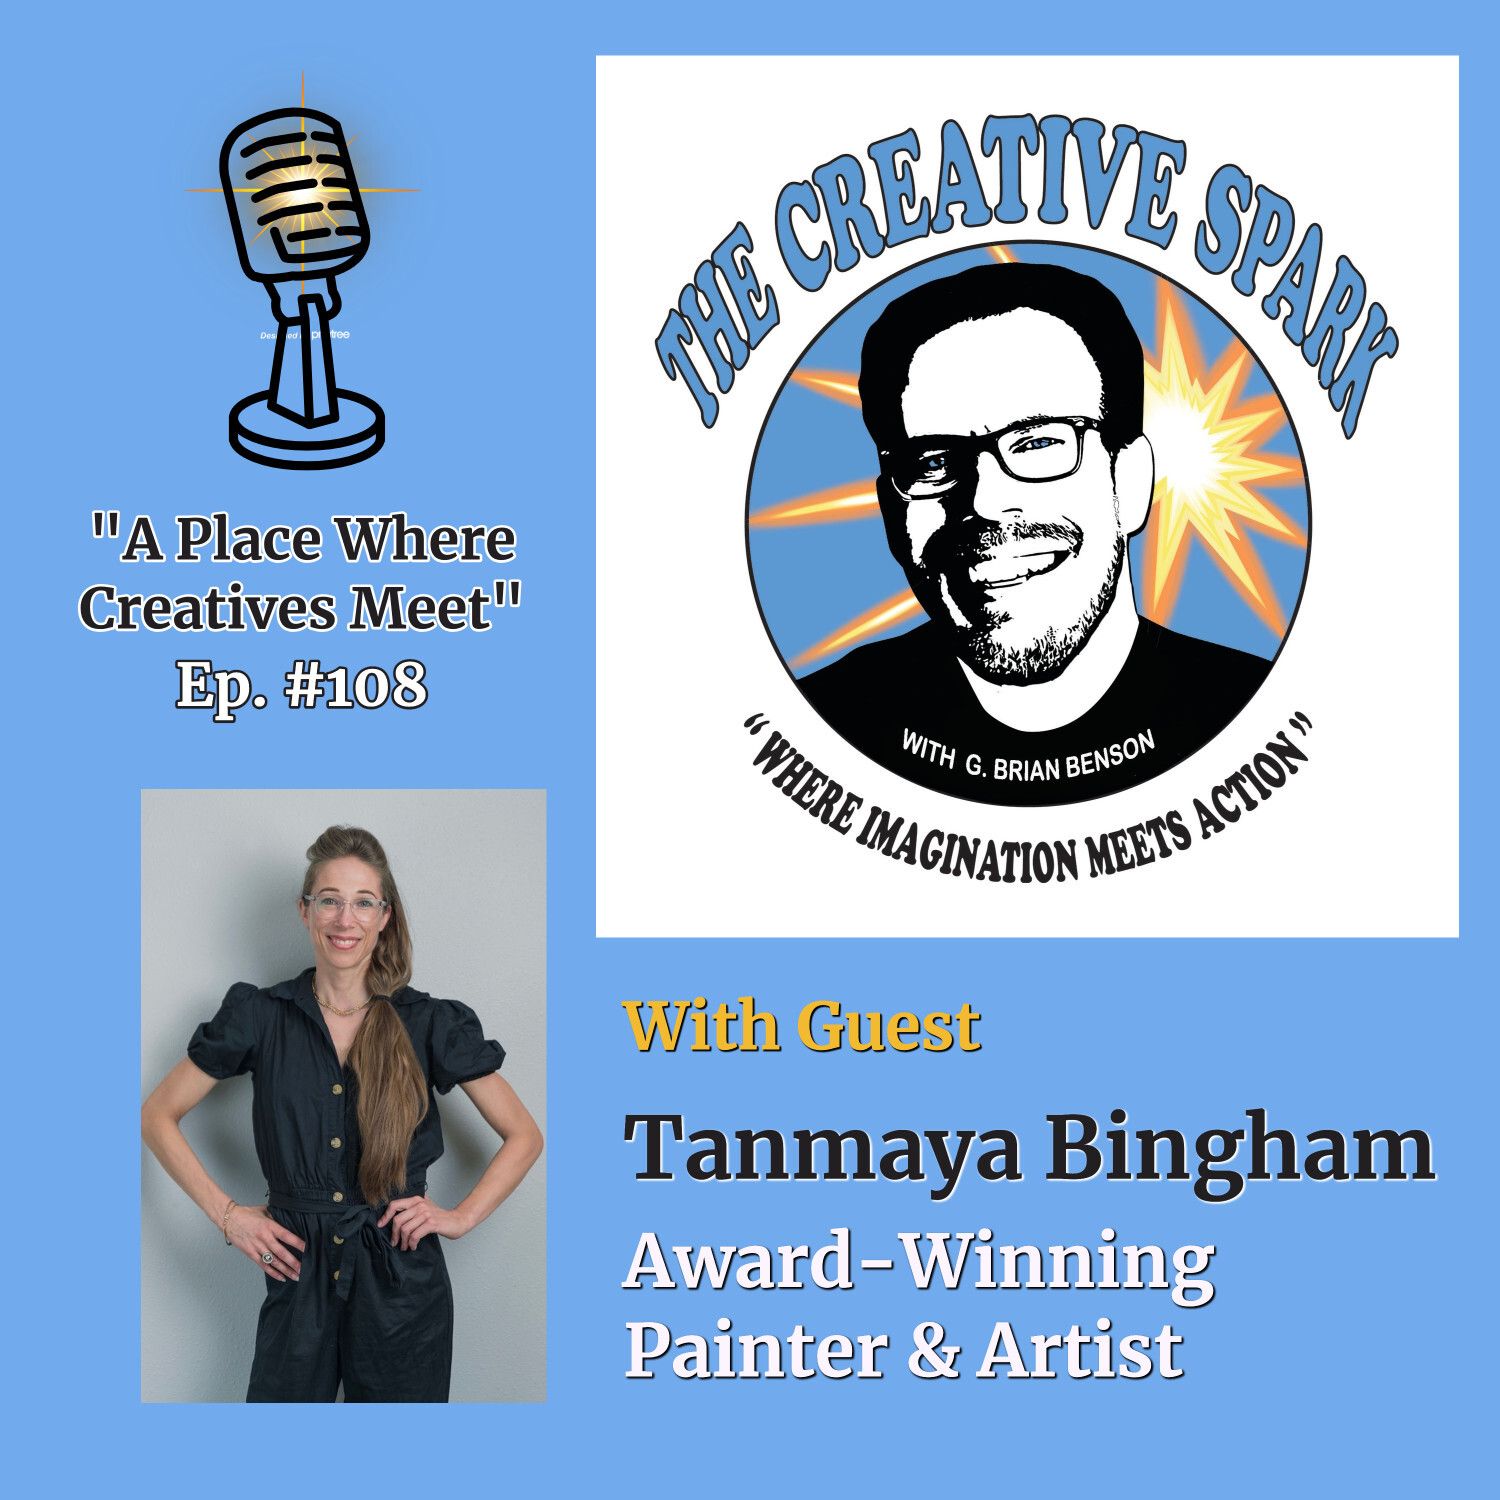 S1 Ep108: The Creative Spark Ep. 108 with Guest Tanmaya Bingham